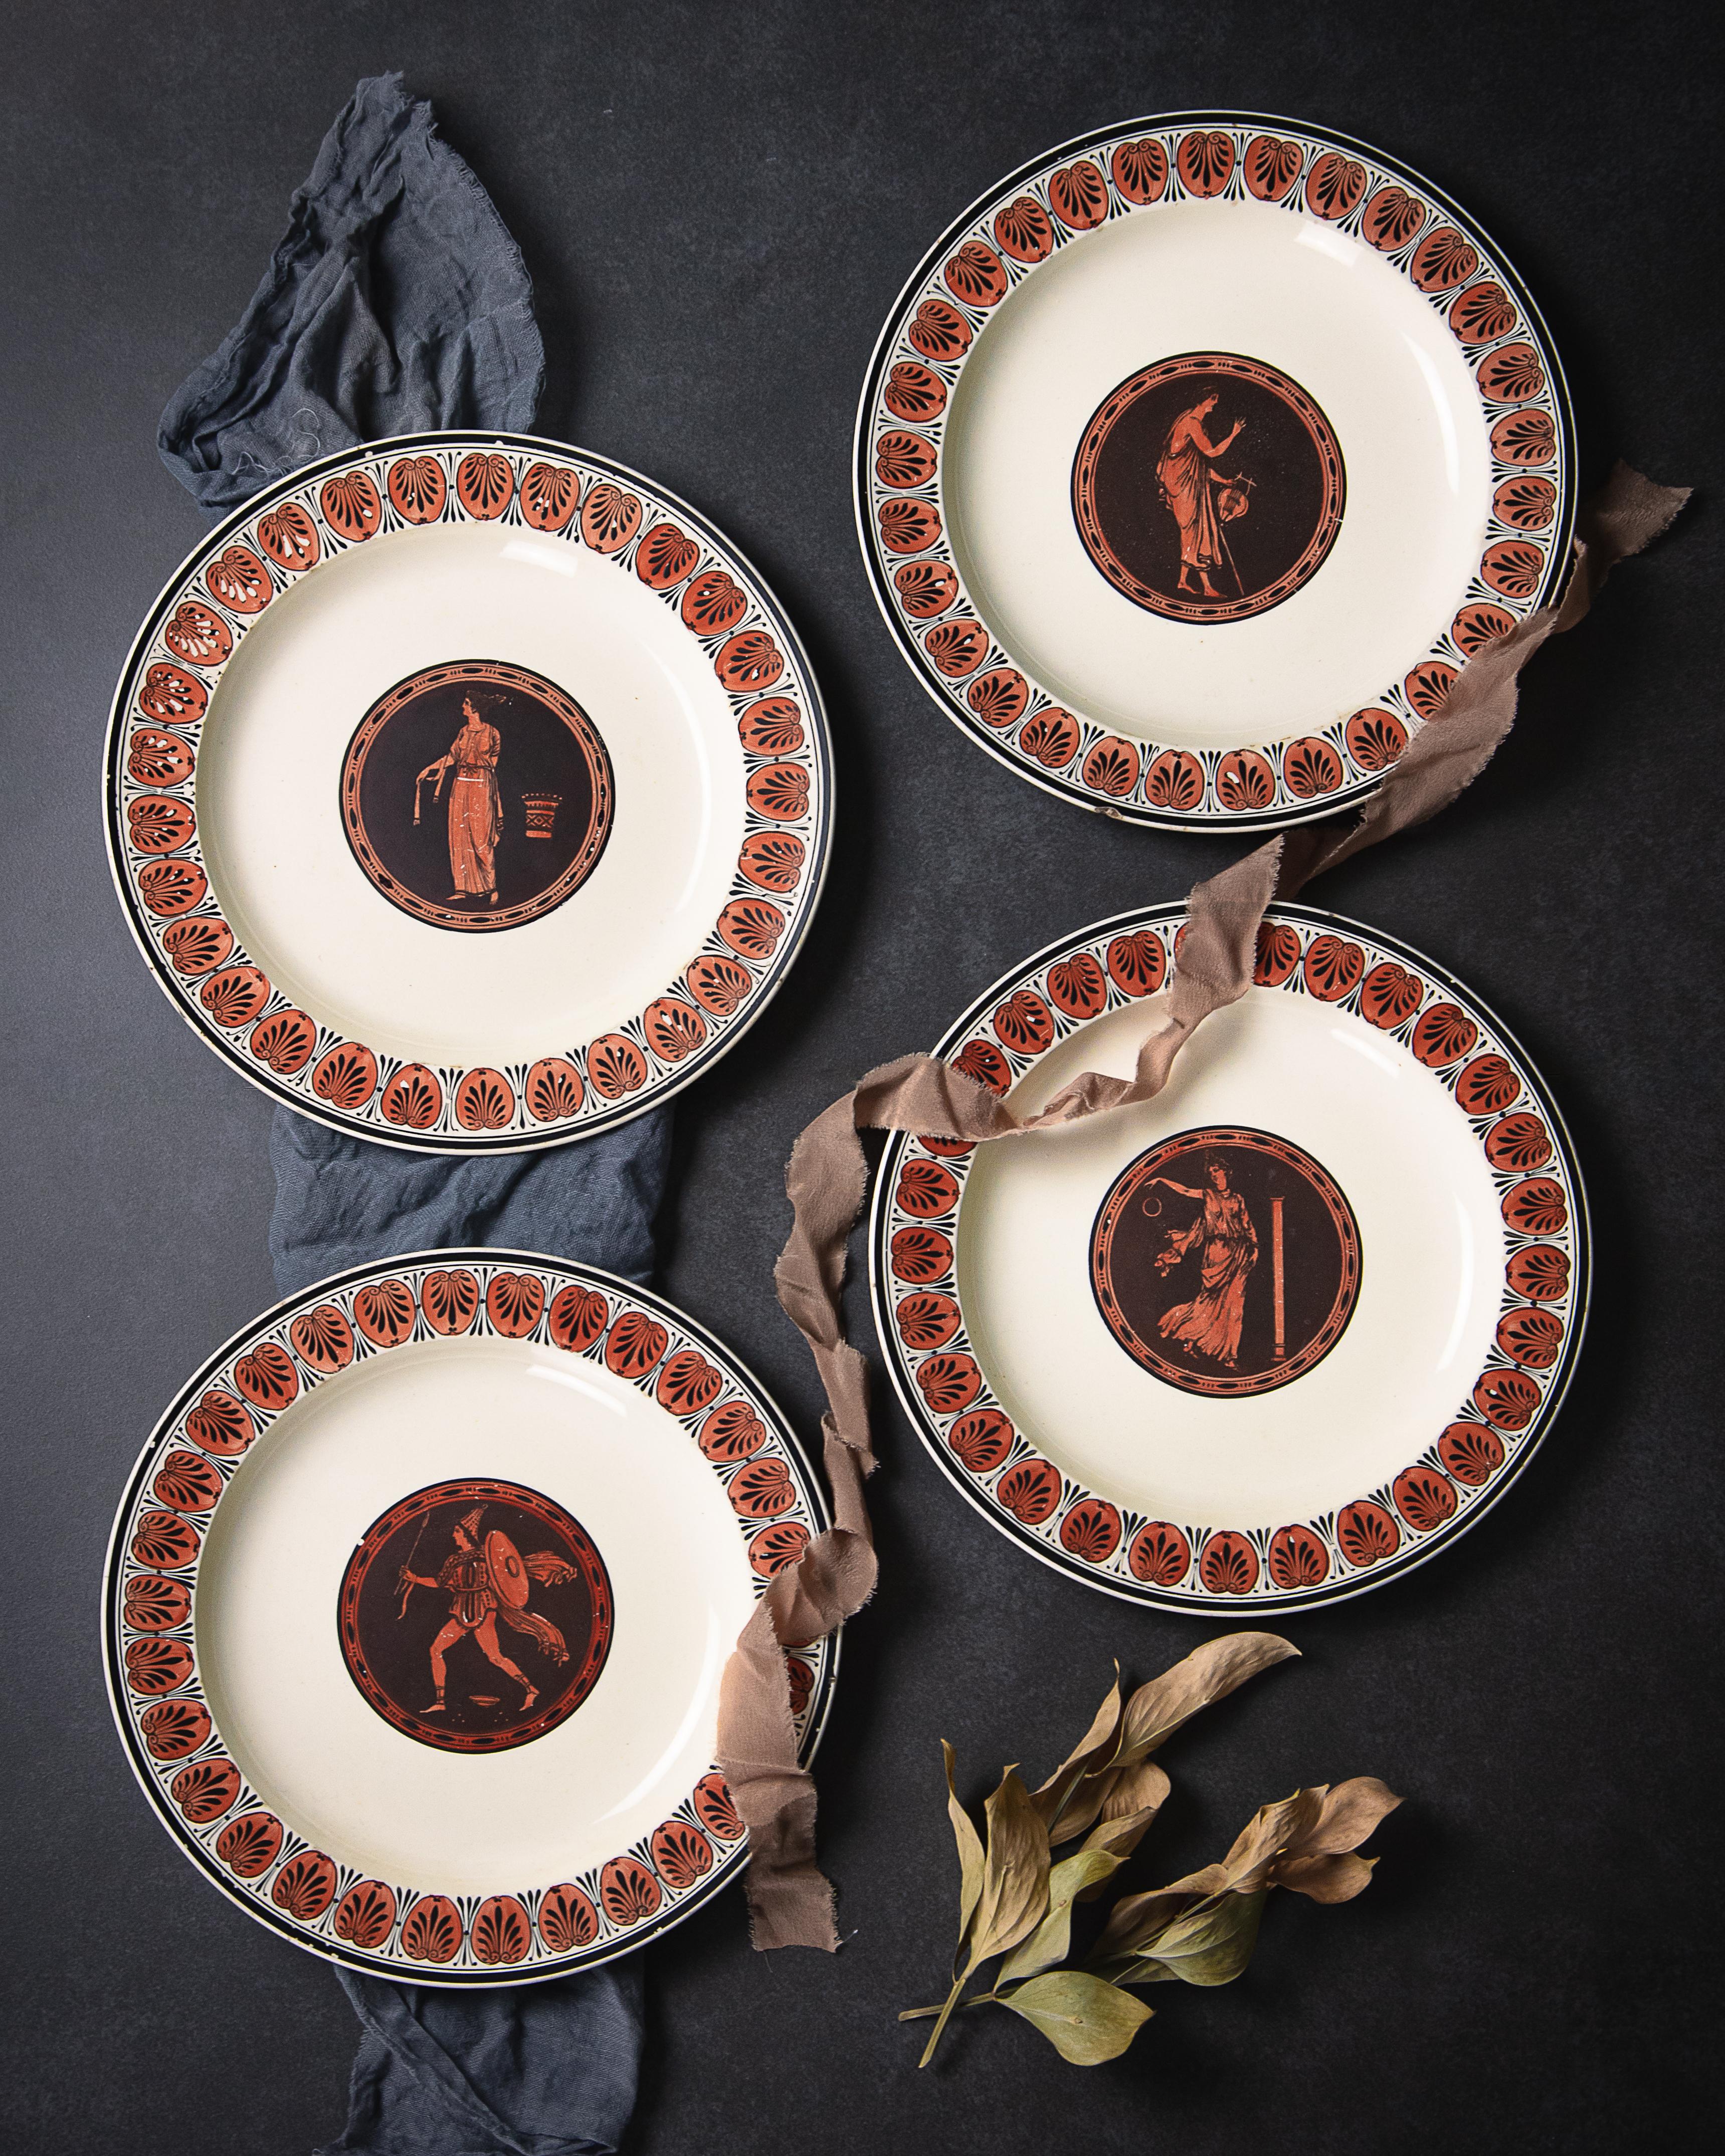 A set of four early Wedgwood creamware Neoclassical dessert dishes made circa 1780.

Sir William Hamilton’s Collection of Etruscan, Greek and Roman antiquities, published in 1766 by Pierre d’Hancarville, was a landmark publication in English